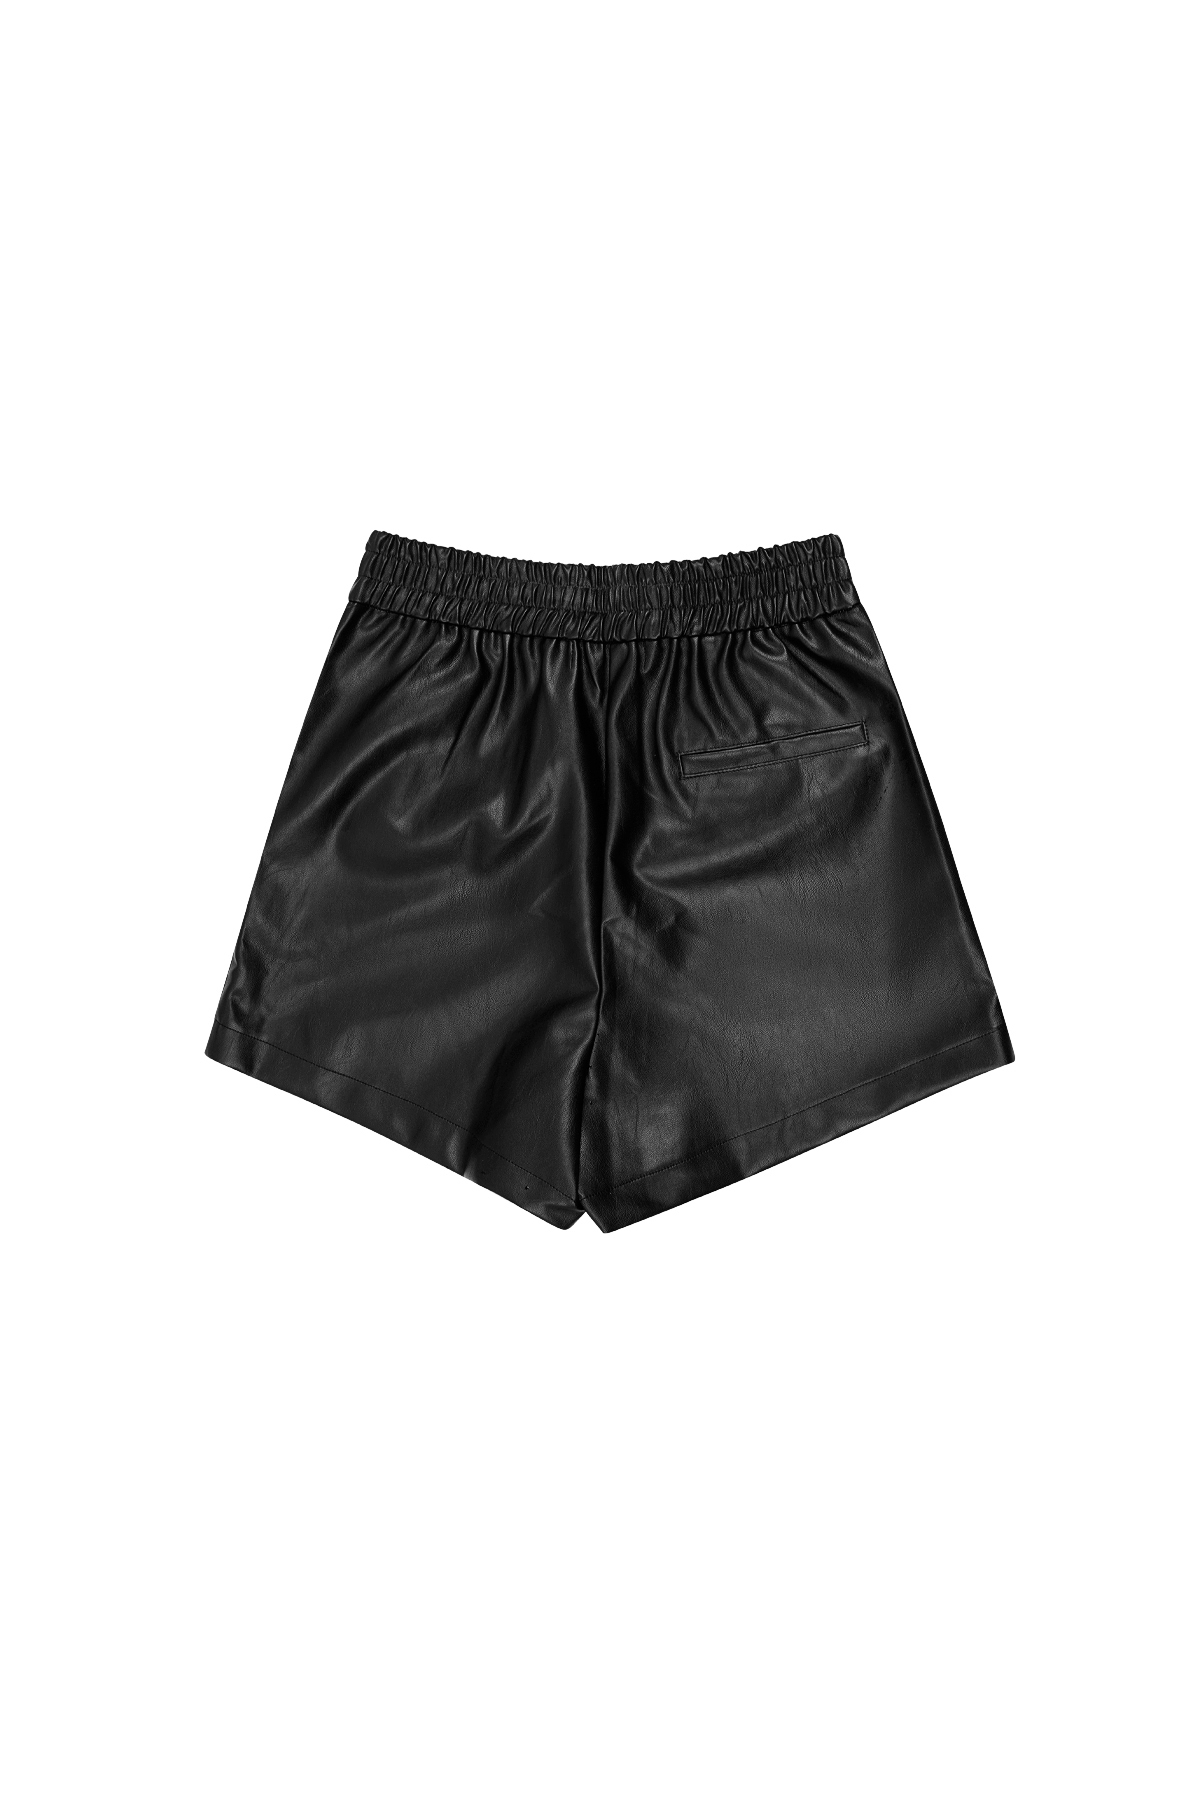 PU leather high waisted shorts - black Picture6